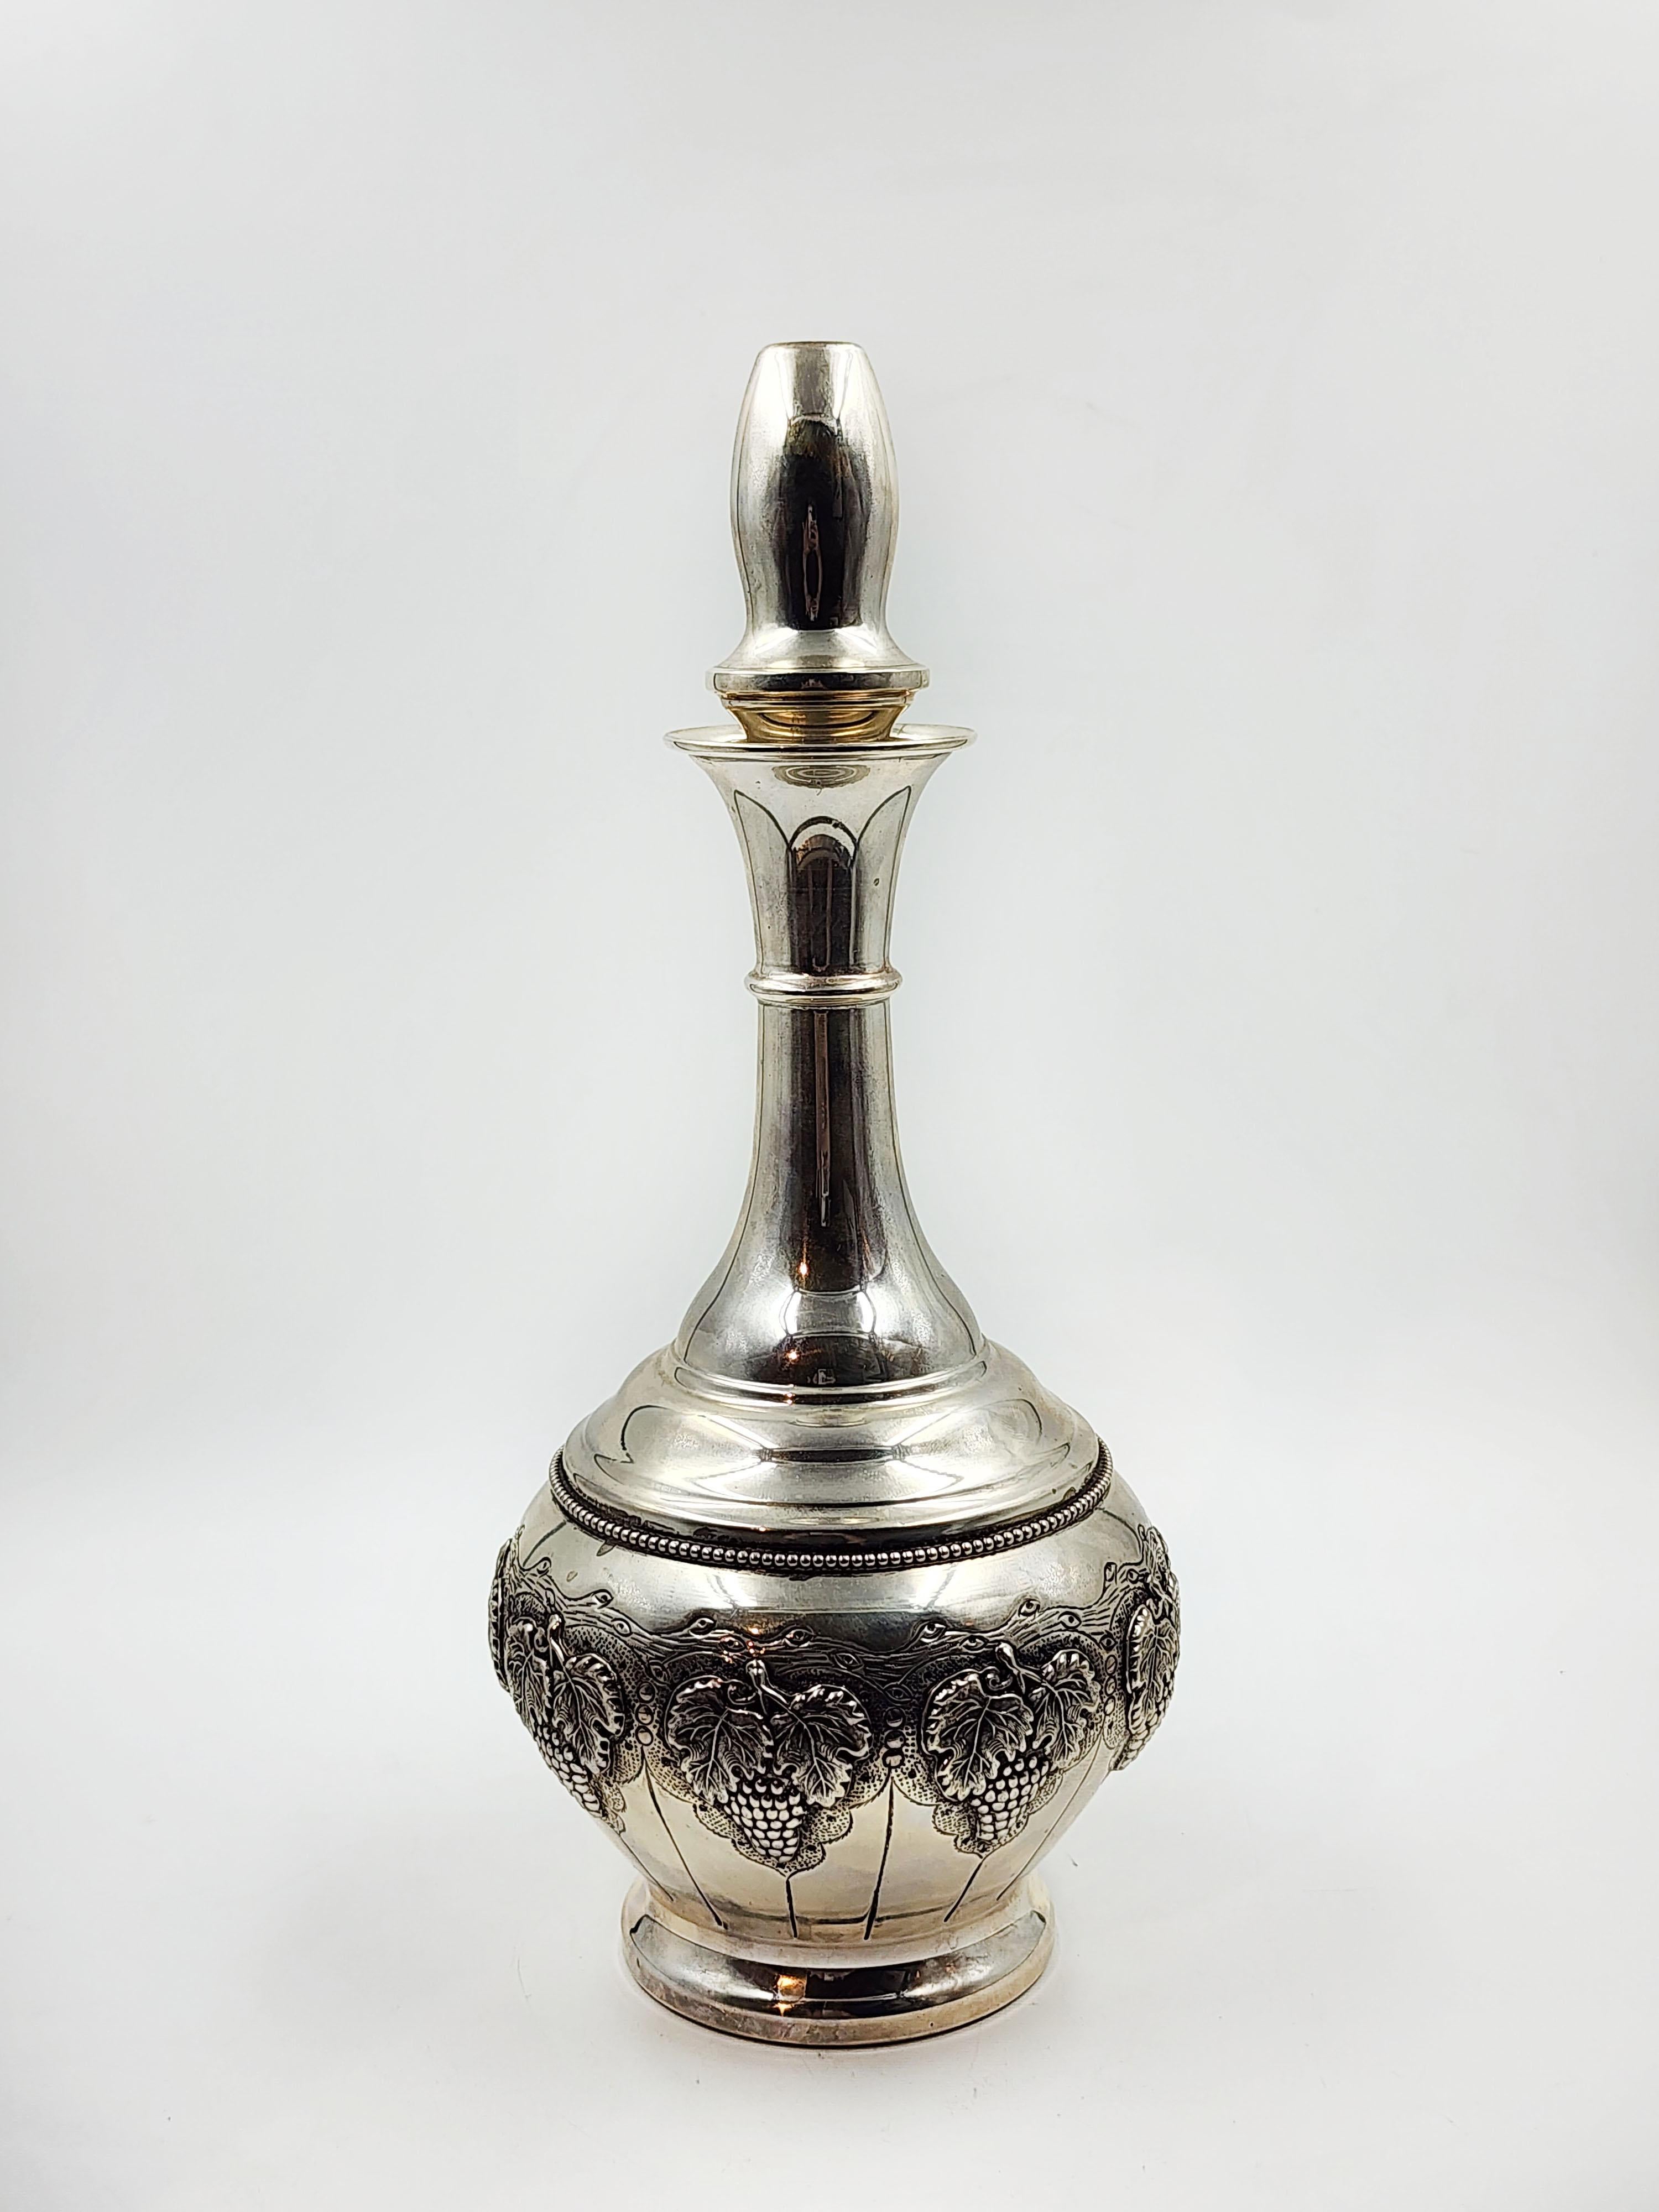 Judaica silver liquor bottle by HAZORFIM
Beautiful silver bottle with a thin neck that widens towards the base, it has an ornamental design of bunches of grapes
Measures:
Height:14.5cm
Diameter:10.5